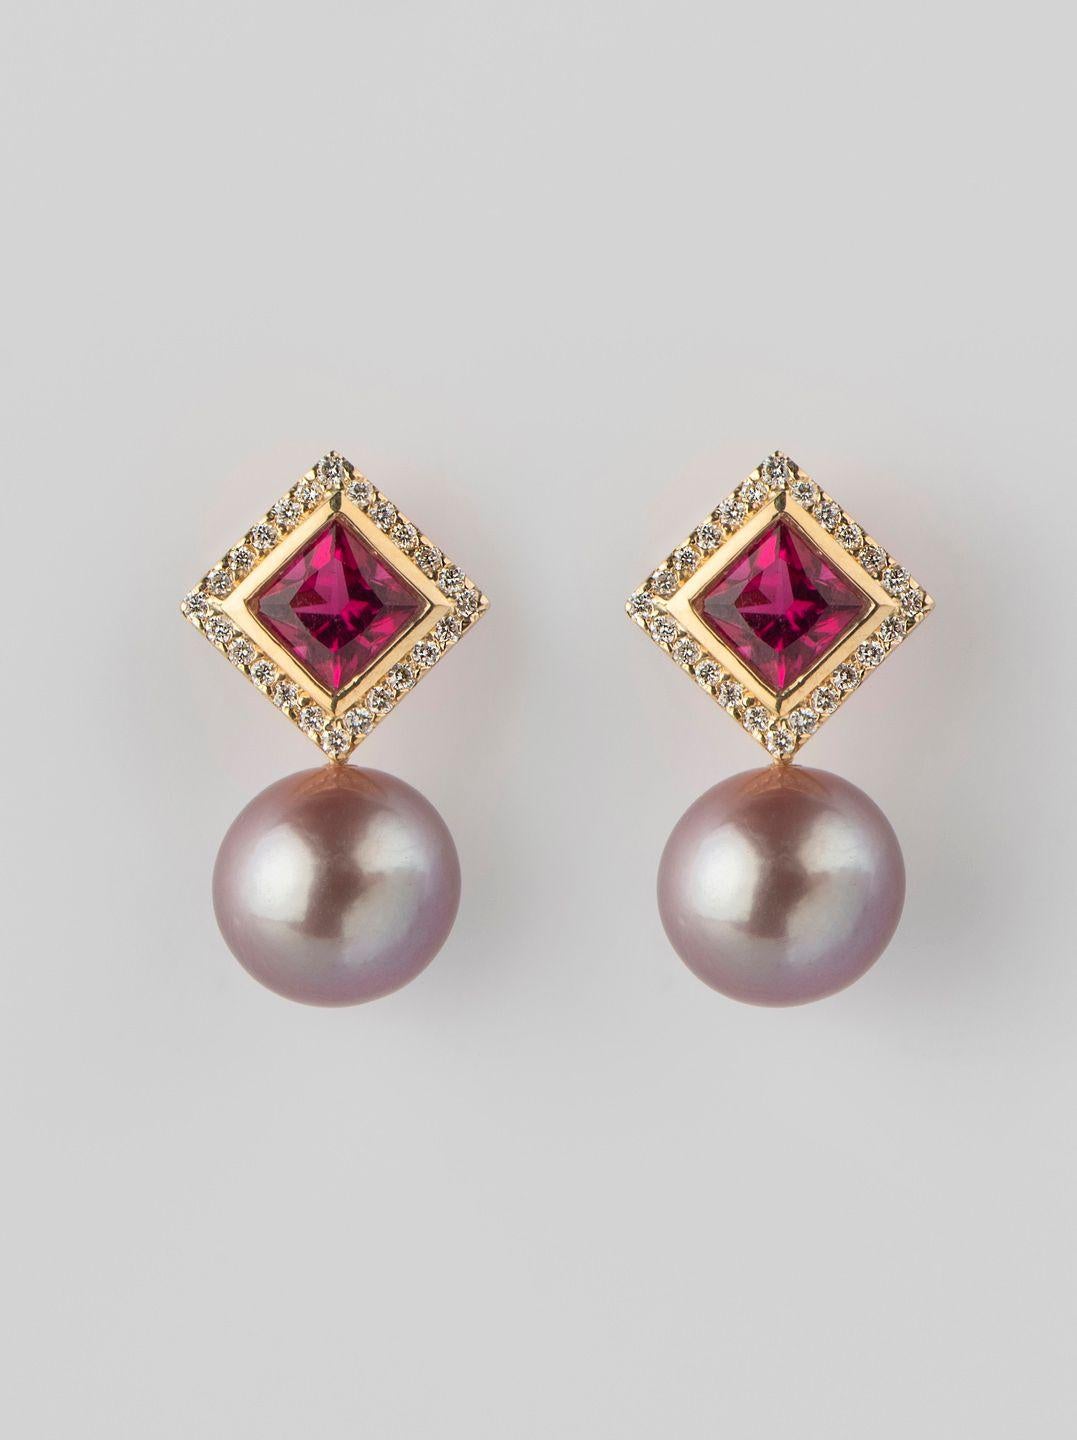 Princess Cut 2.40cts Rubellite diamond lilac pearl earrings, 18K gold, by Michelle Massoura For Sale